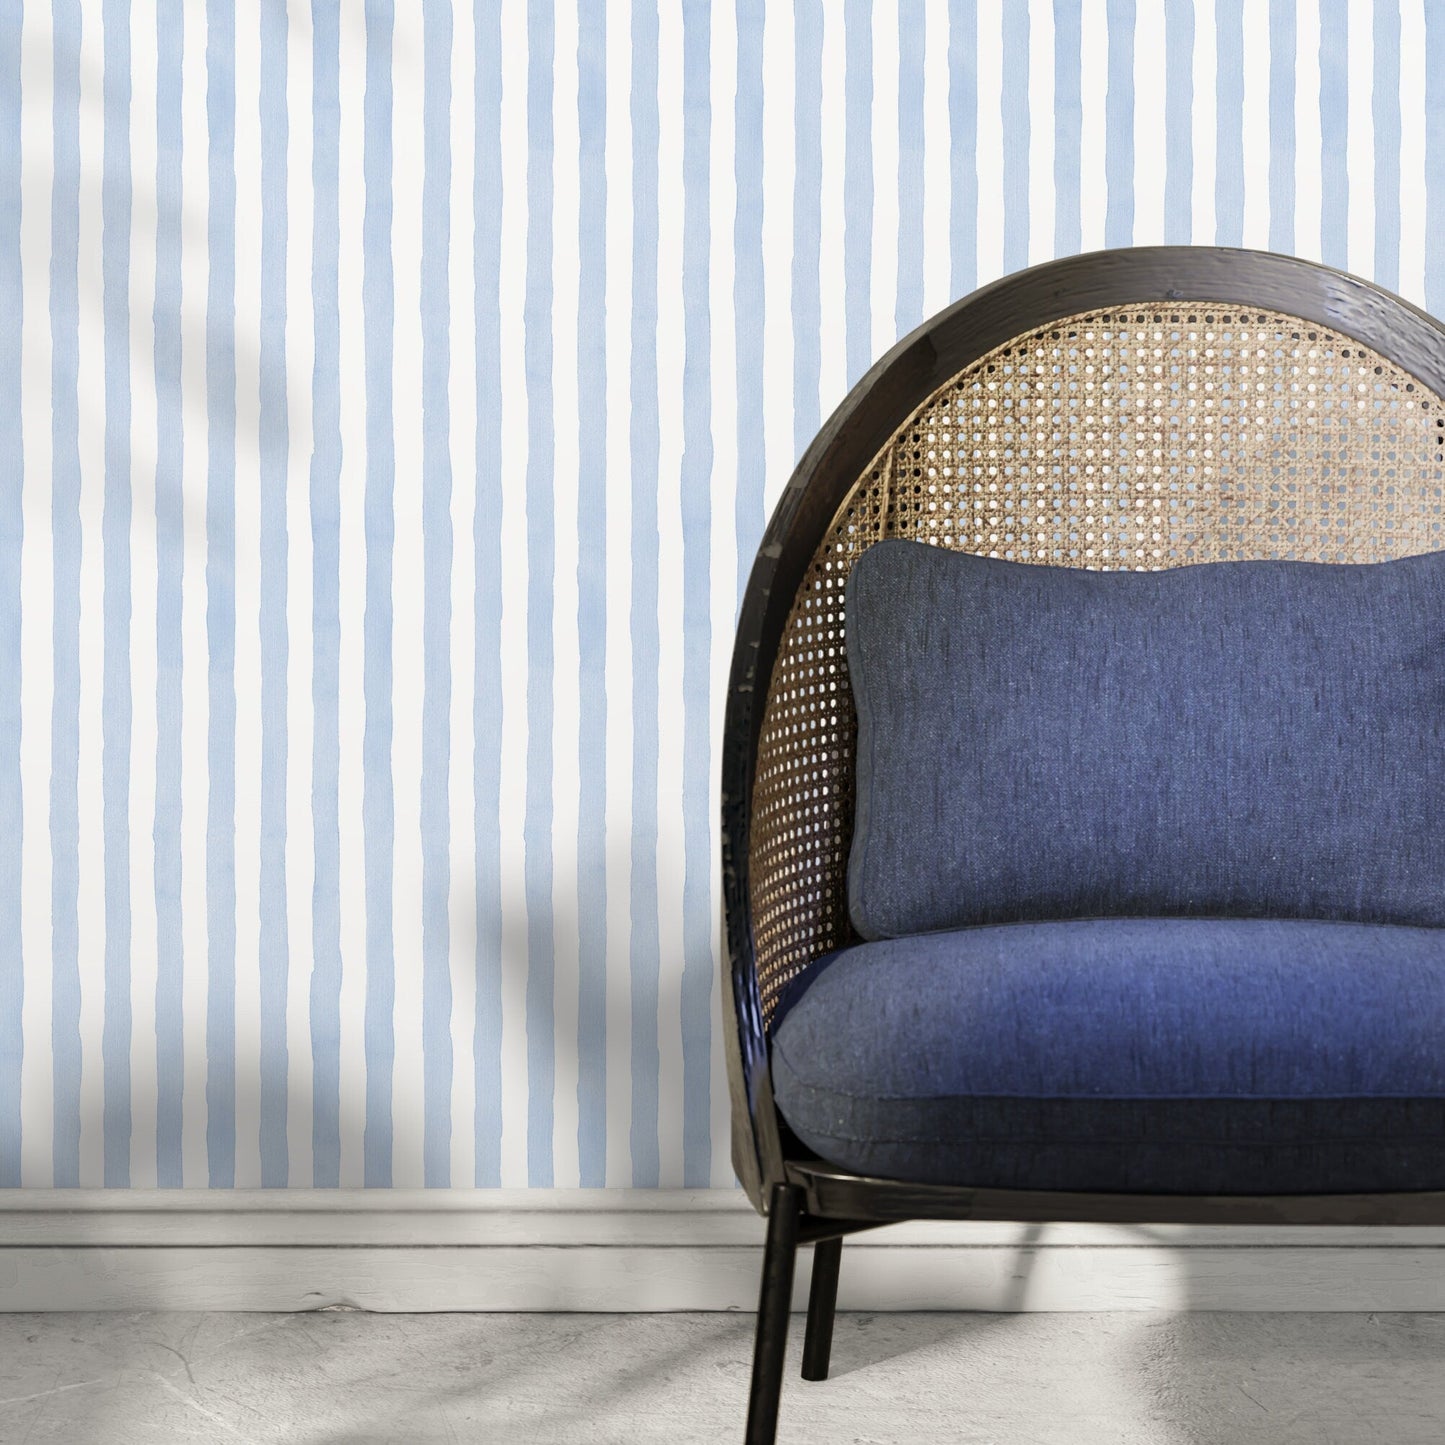 Baby Blue Striped Wallpaper Watercolor Wallpaper Peel and Stick and Traditional Wallpaper - D858